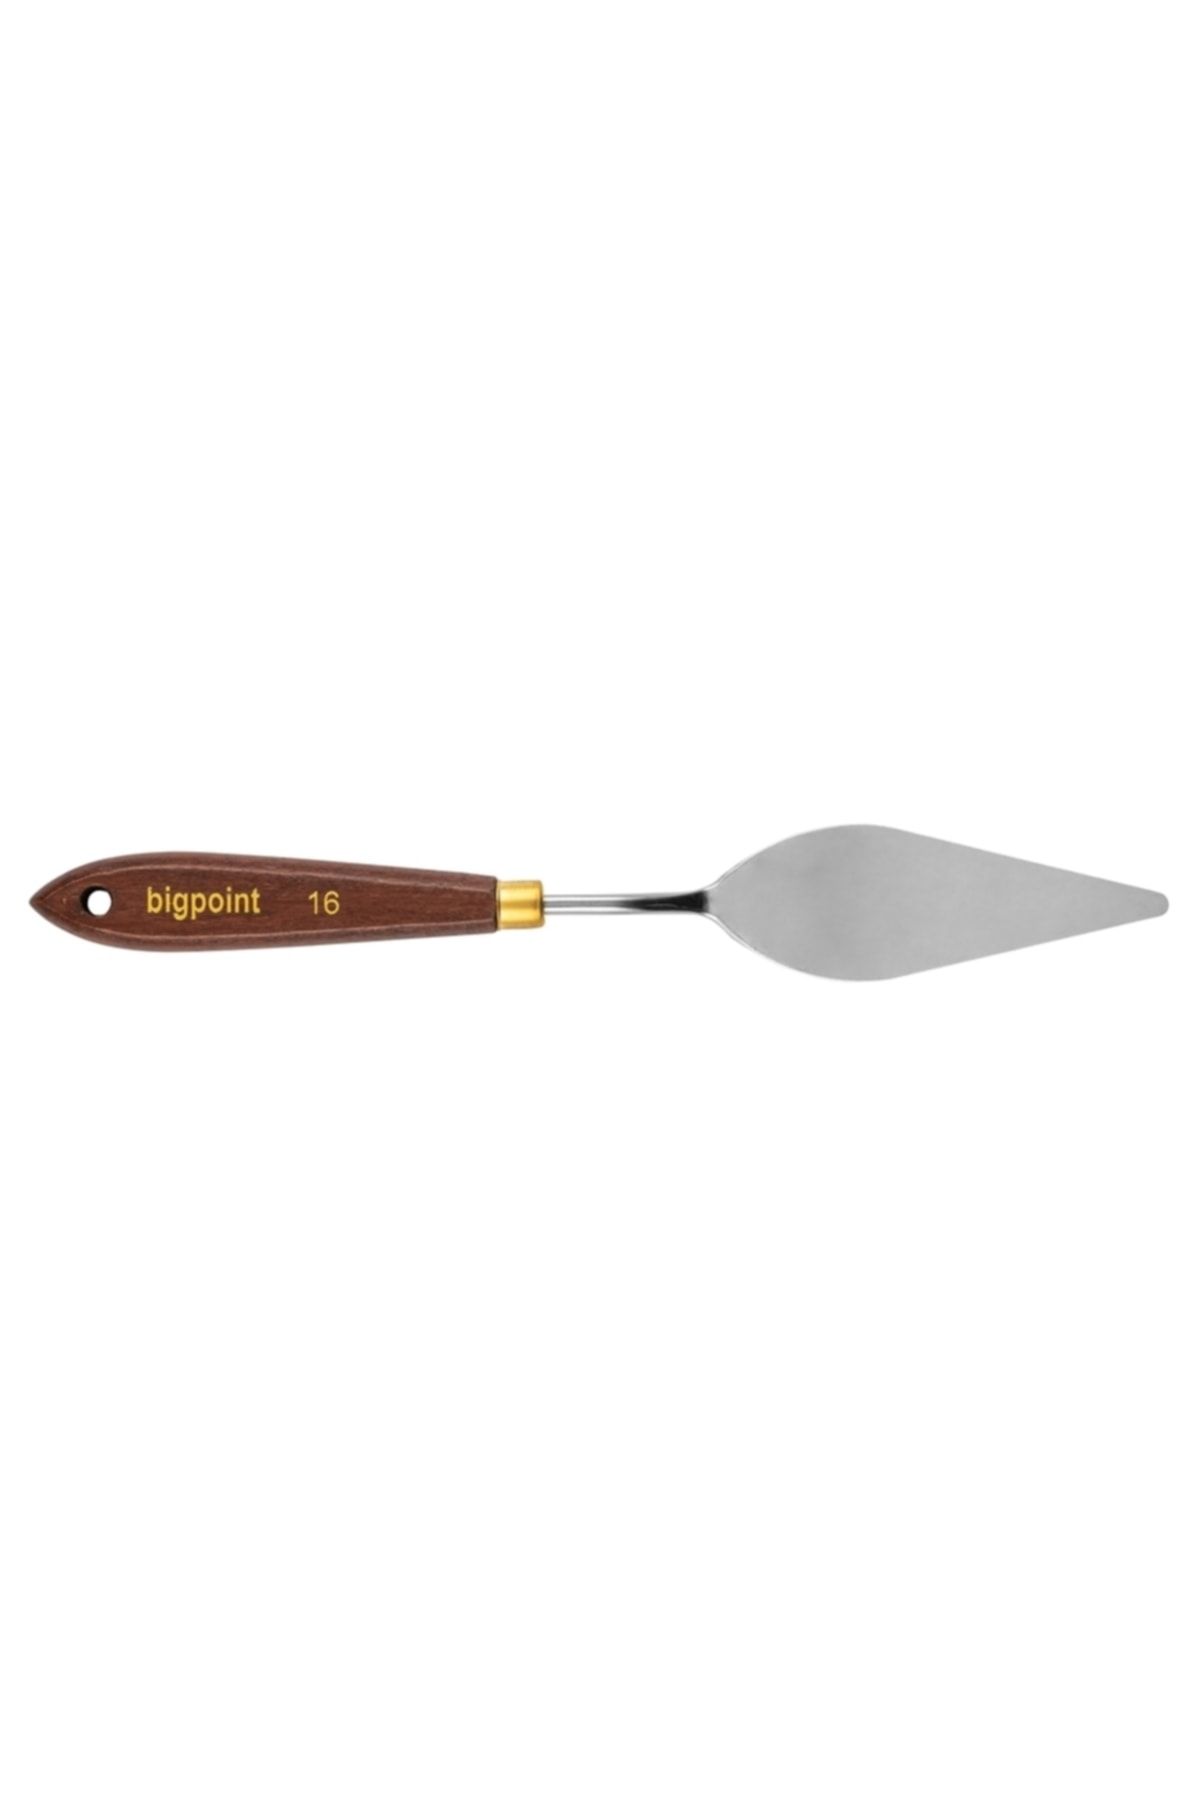 Bigpoint Metal Spatula No: 16 (painting Knife)